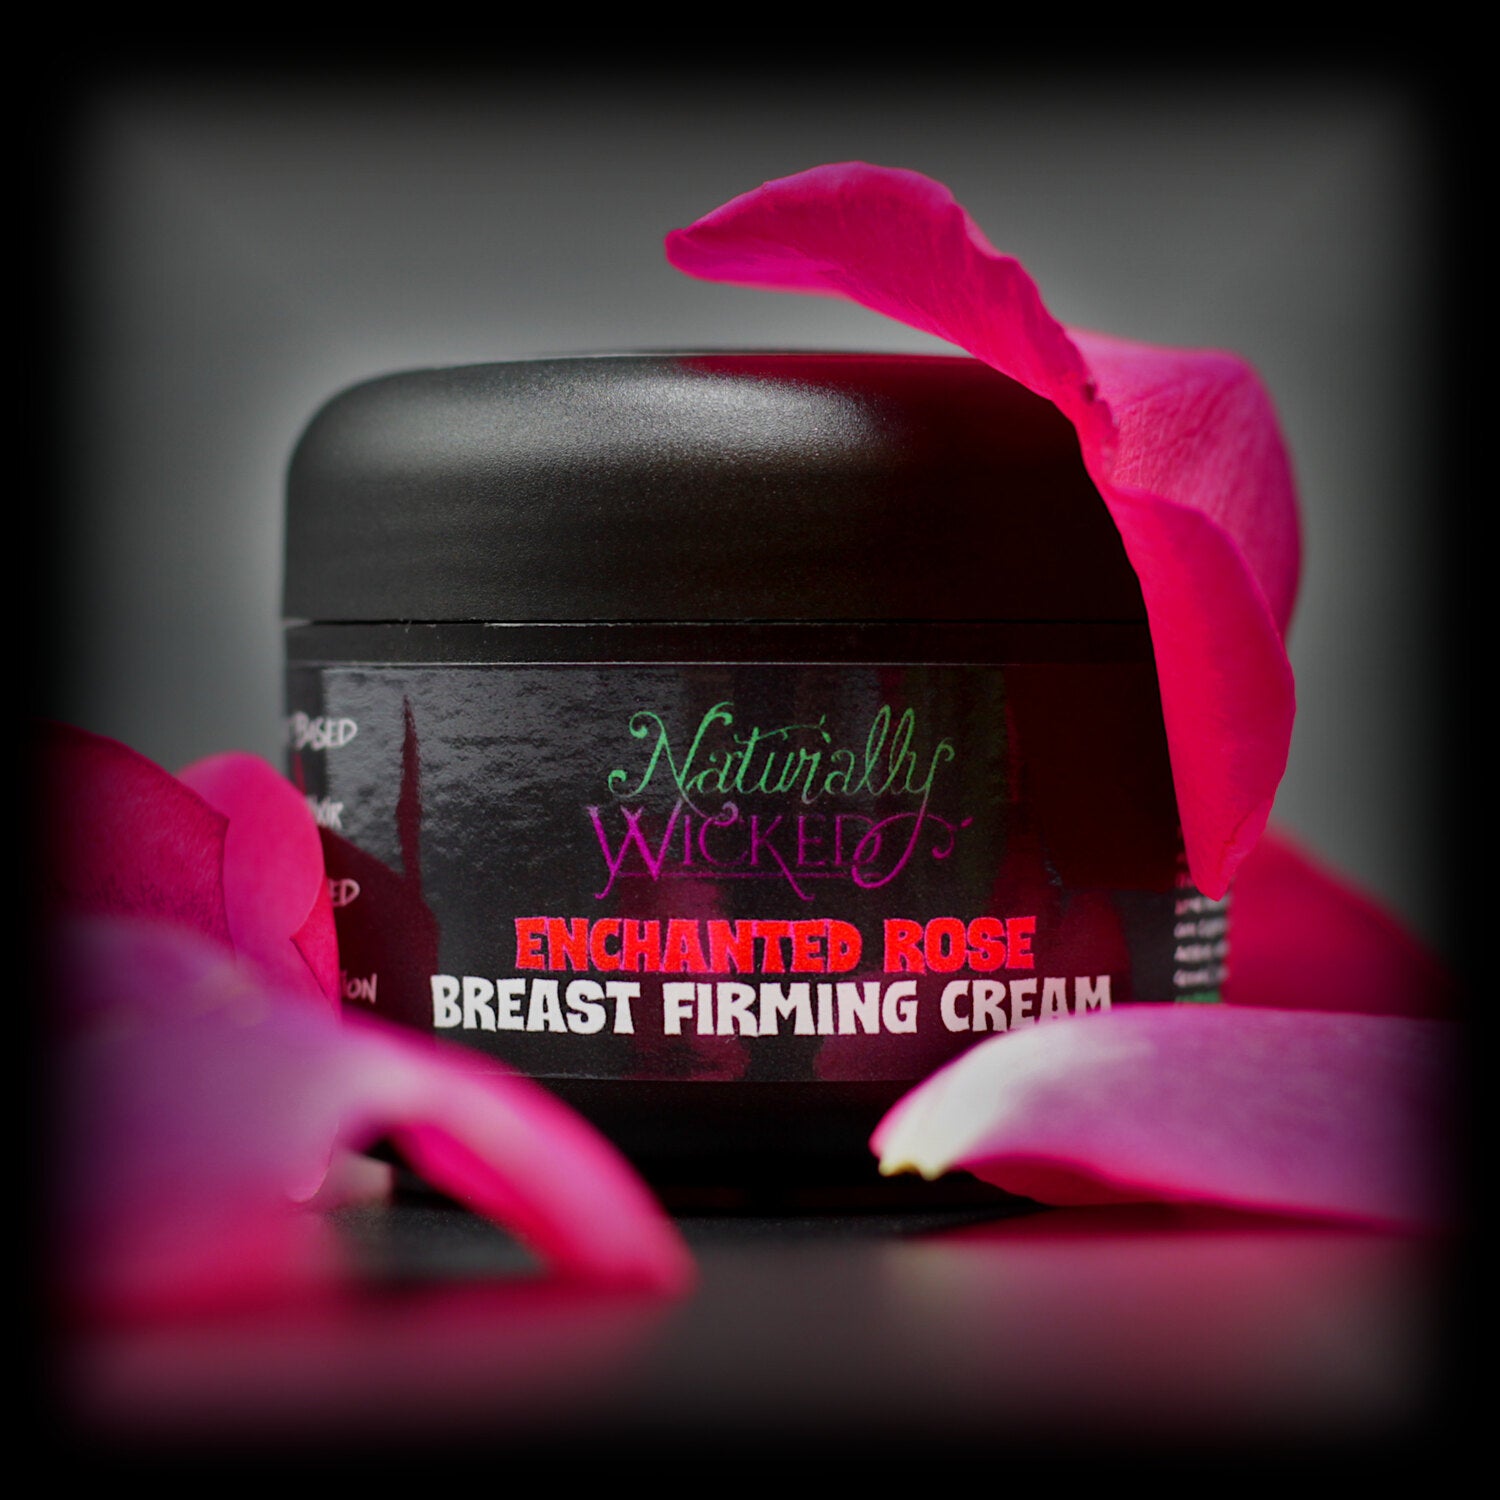 Naturally Wicked Enchanted Rose Breast Firming Cream Drenched In Vibrant Pink Rose Petals